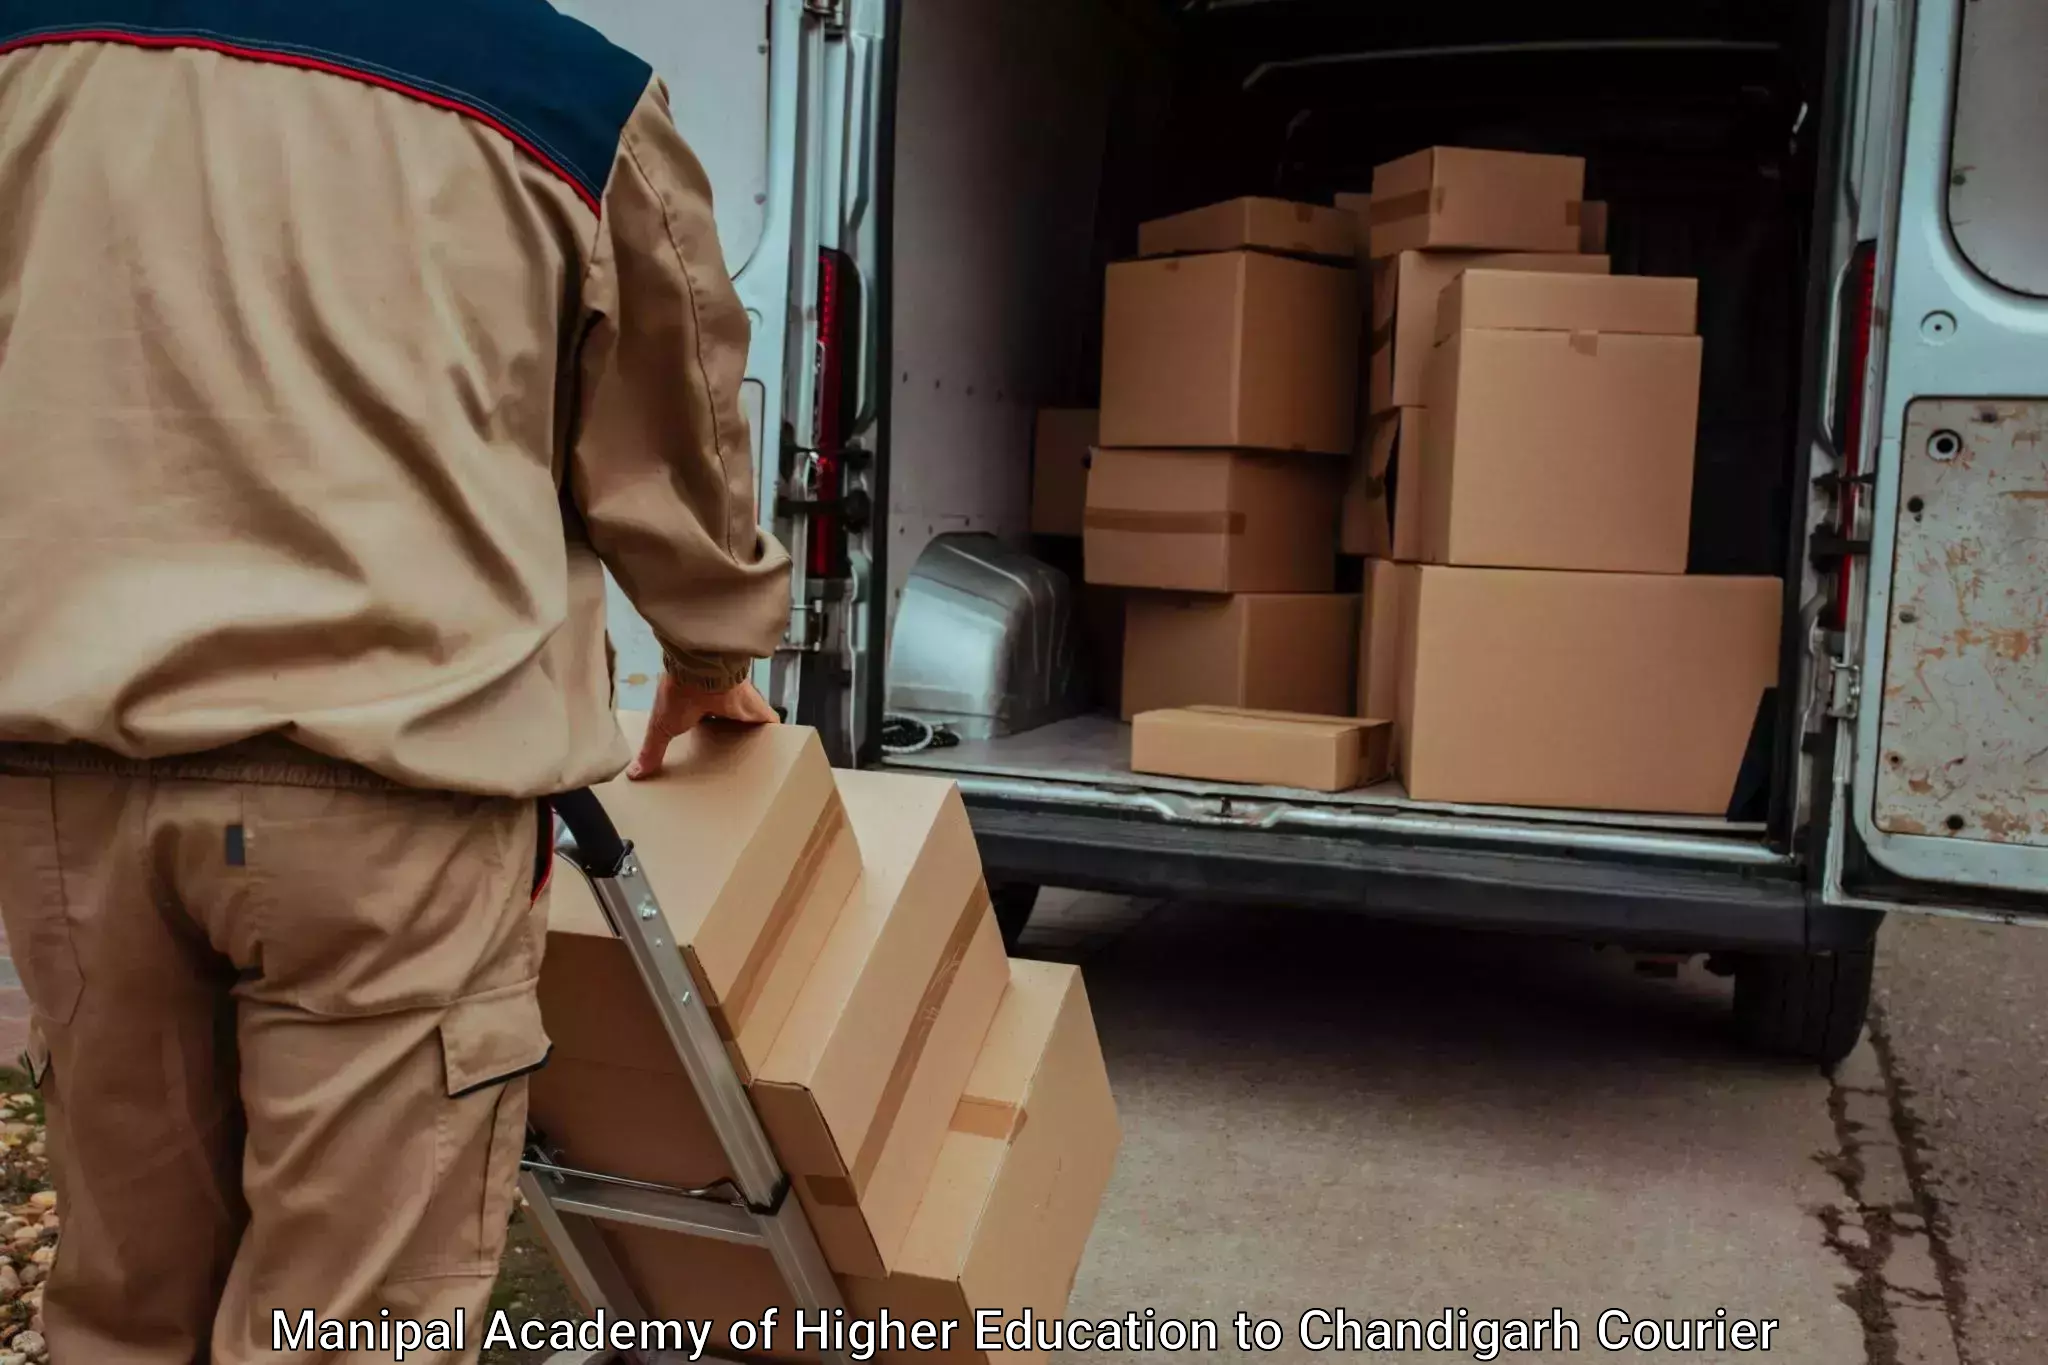 Baggage transport logistics in Manipal Academy of Higher Education to Chandigarh